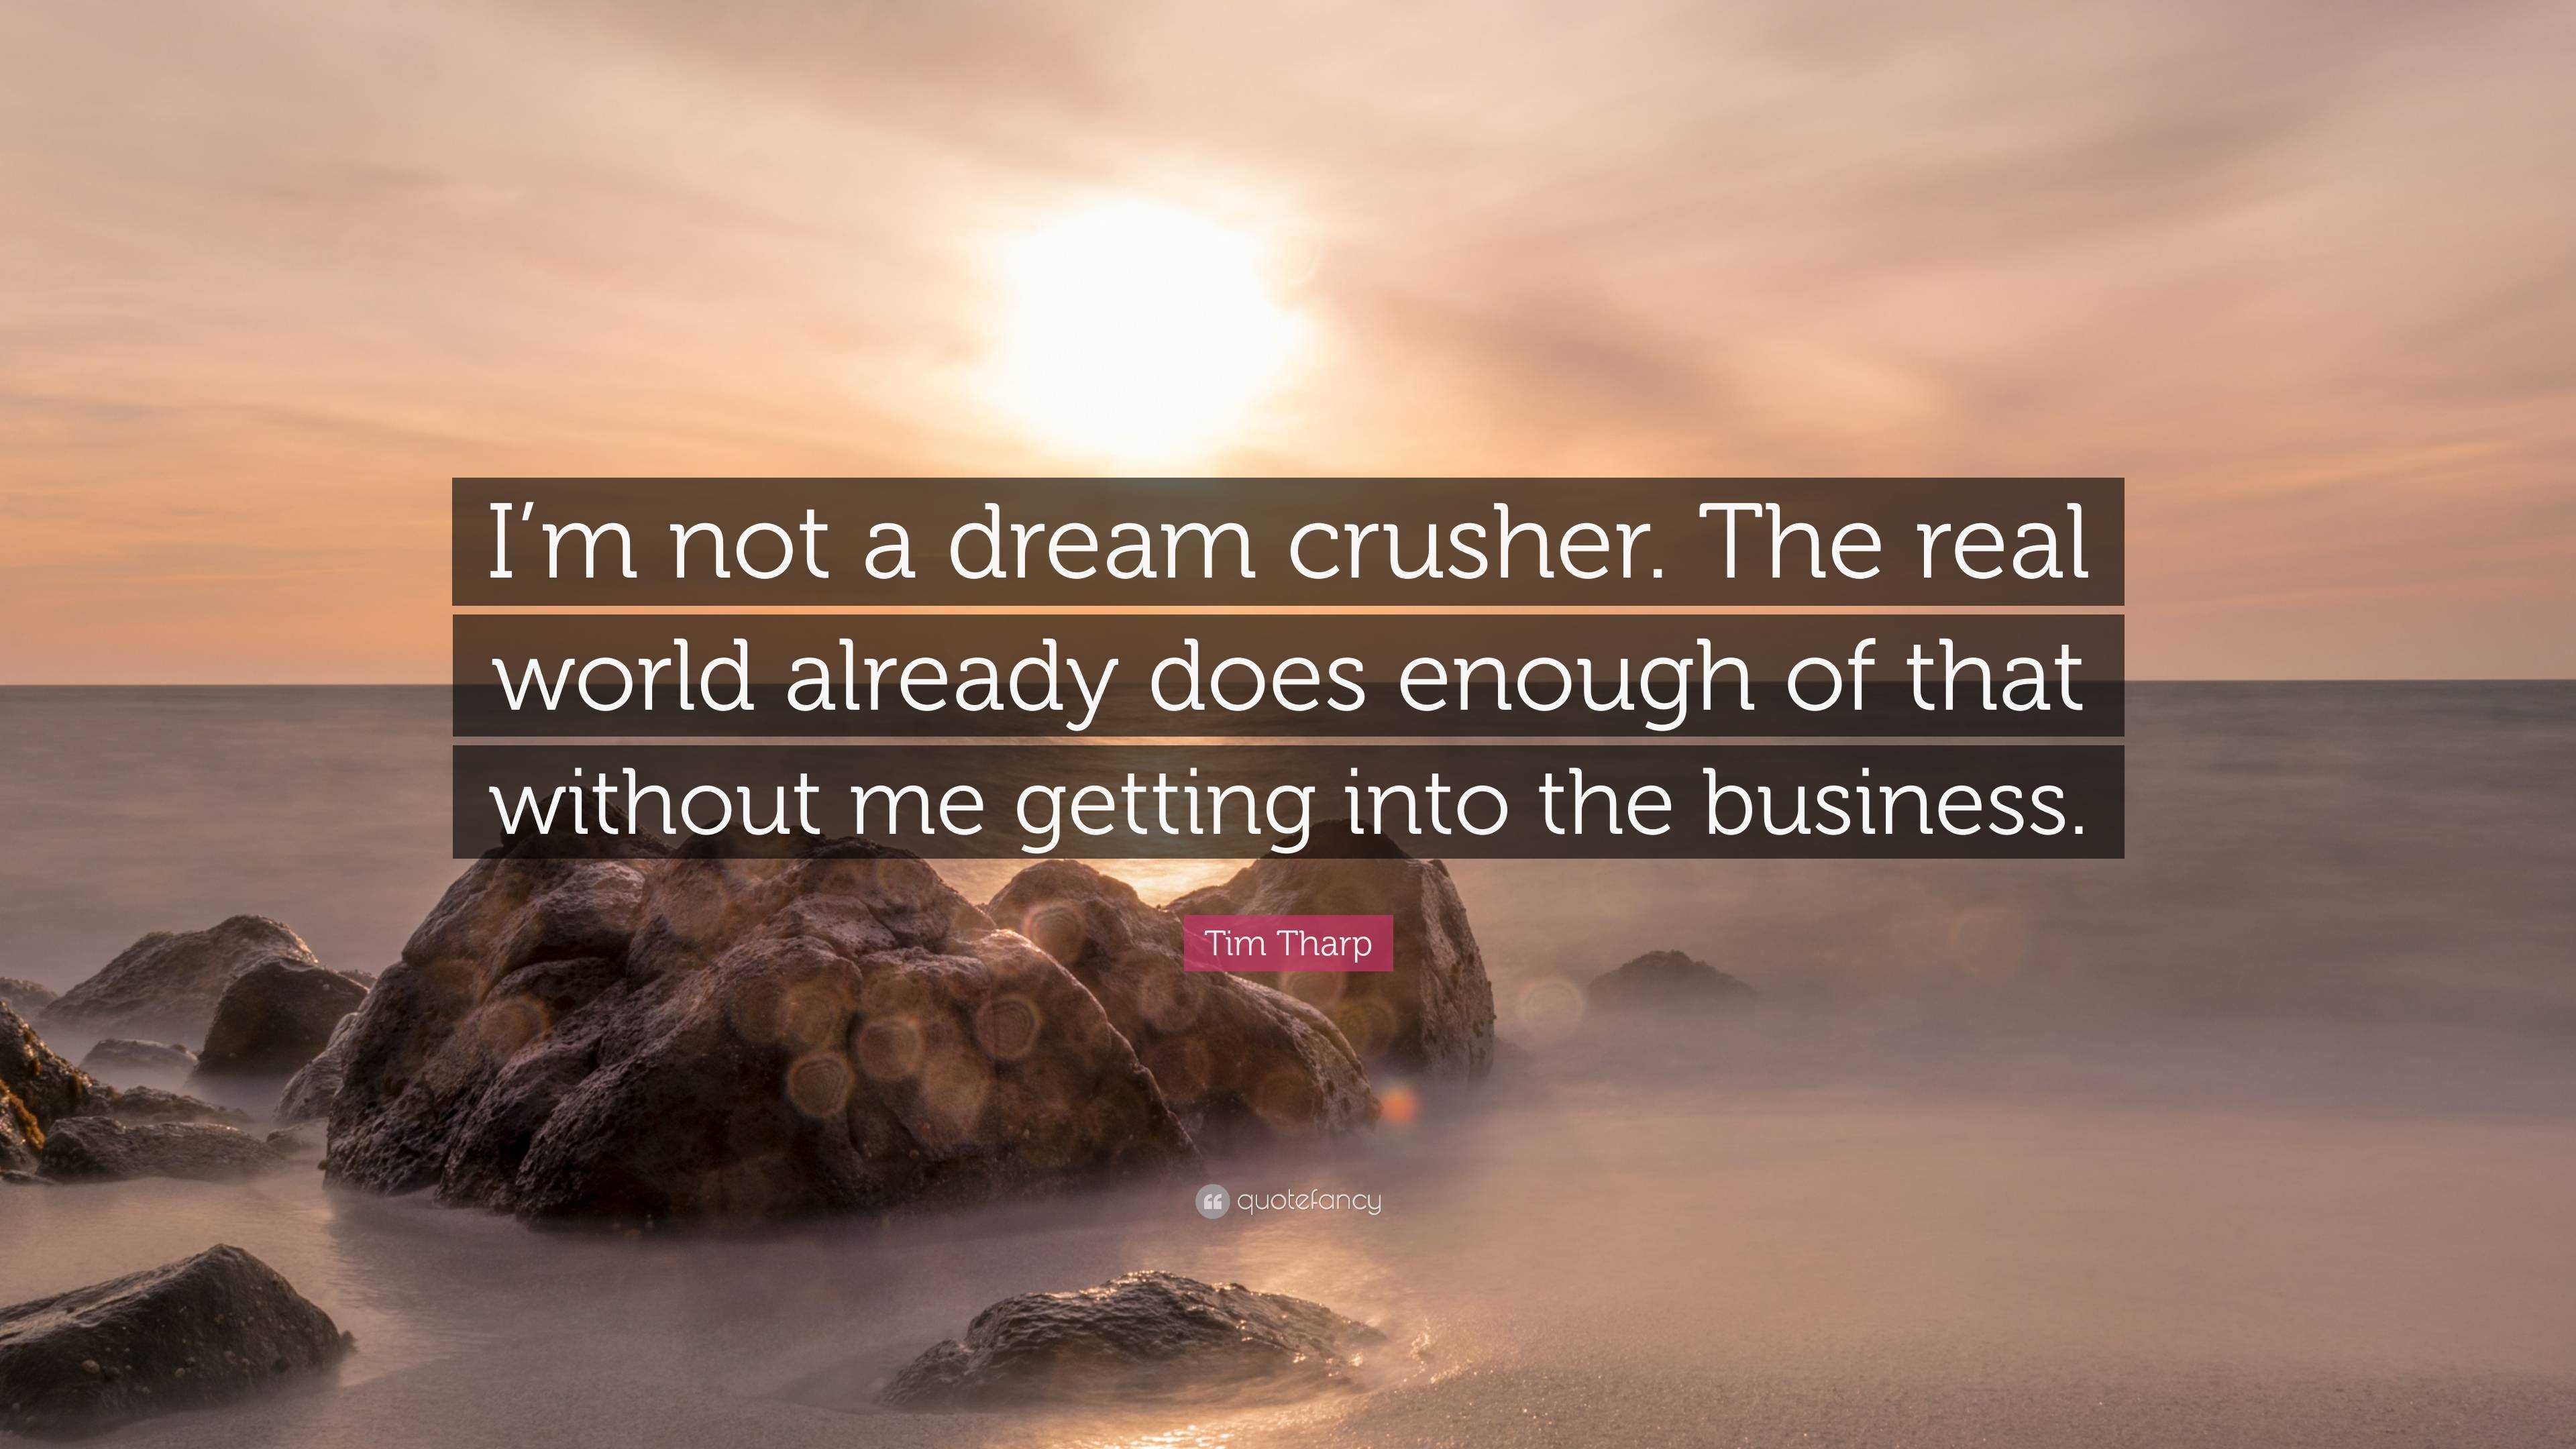 Tim Tharp Quote: “I'm not a dream crusher. The real world already does  enough of